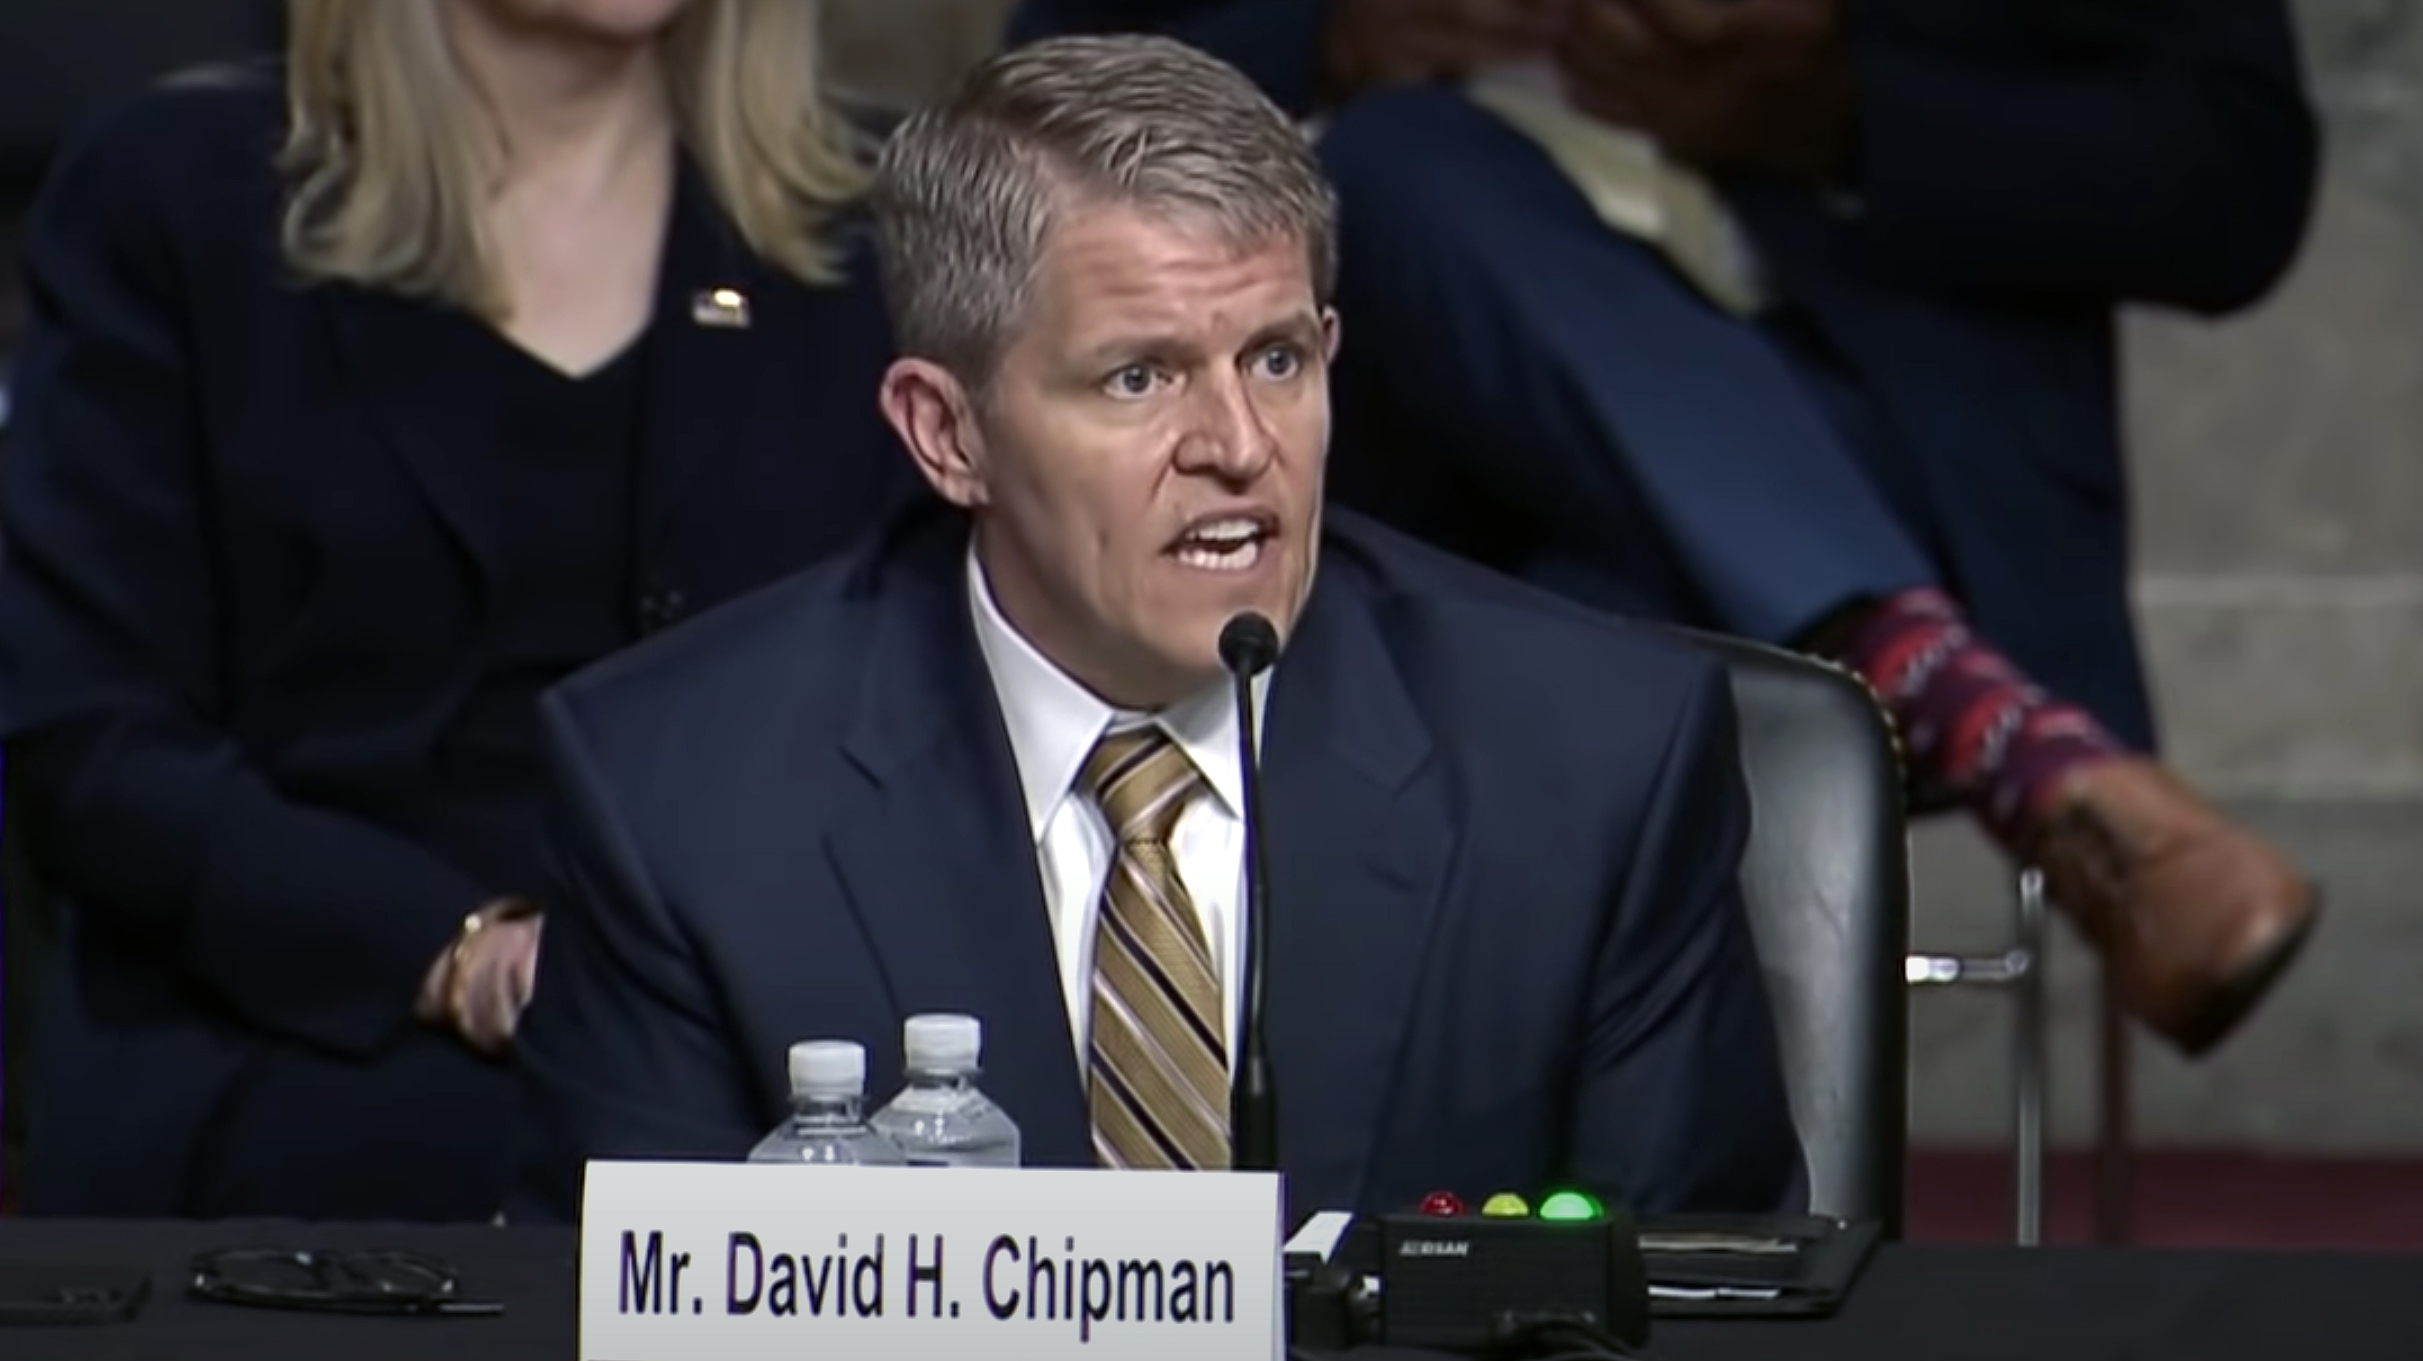 David Chipman admitted he wants to ban the AR-15 before a Senate Judiciary Committee hearing.